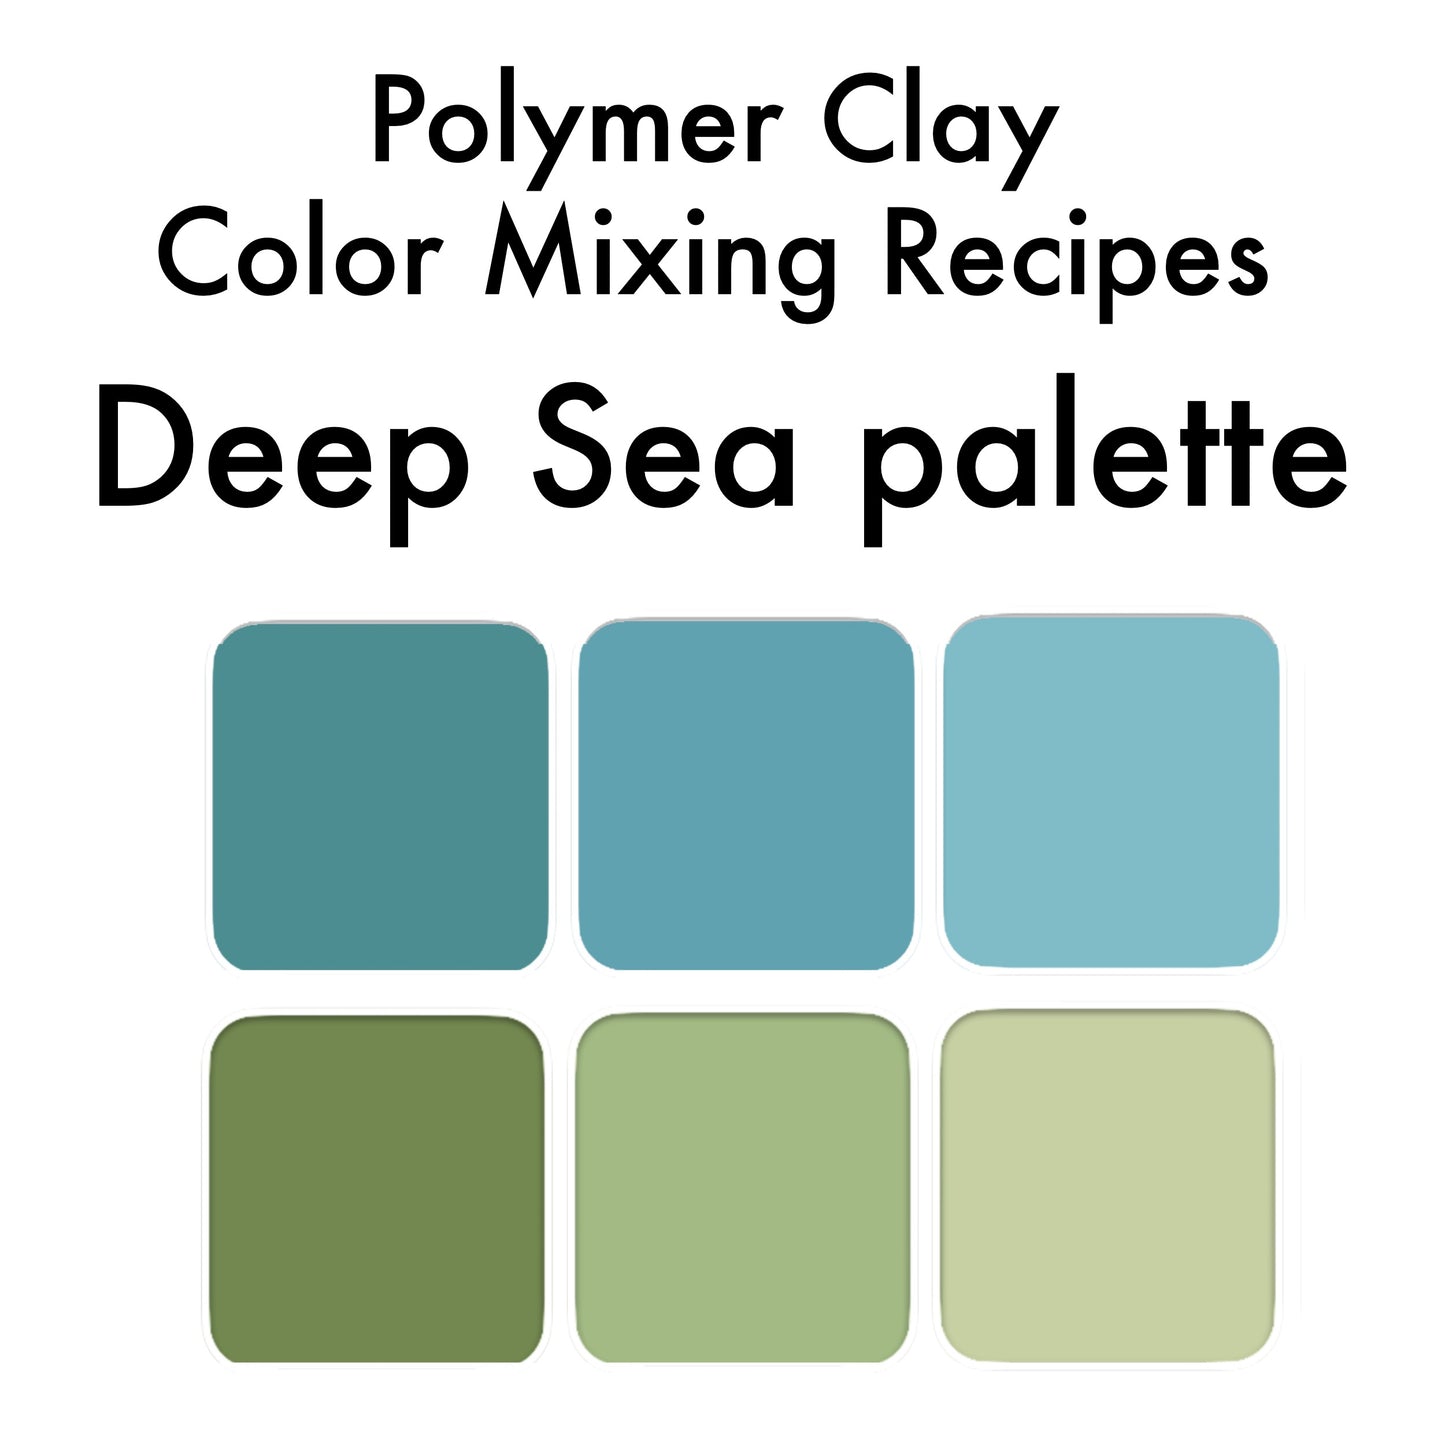 Deep Sea palette - color recipes for Premo polymer clay